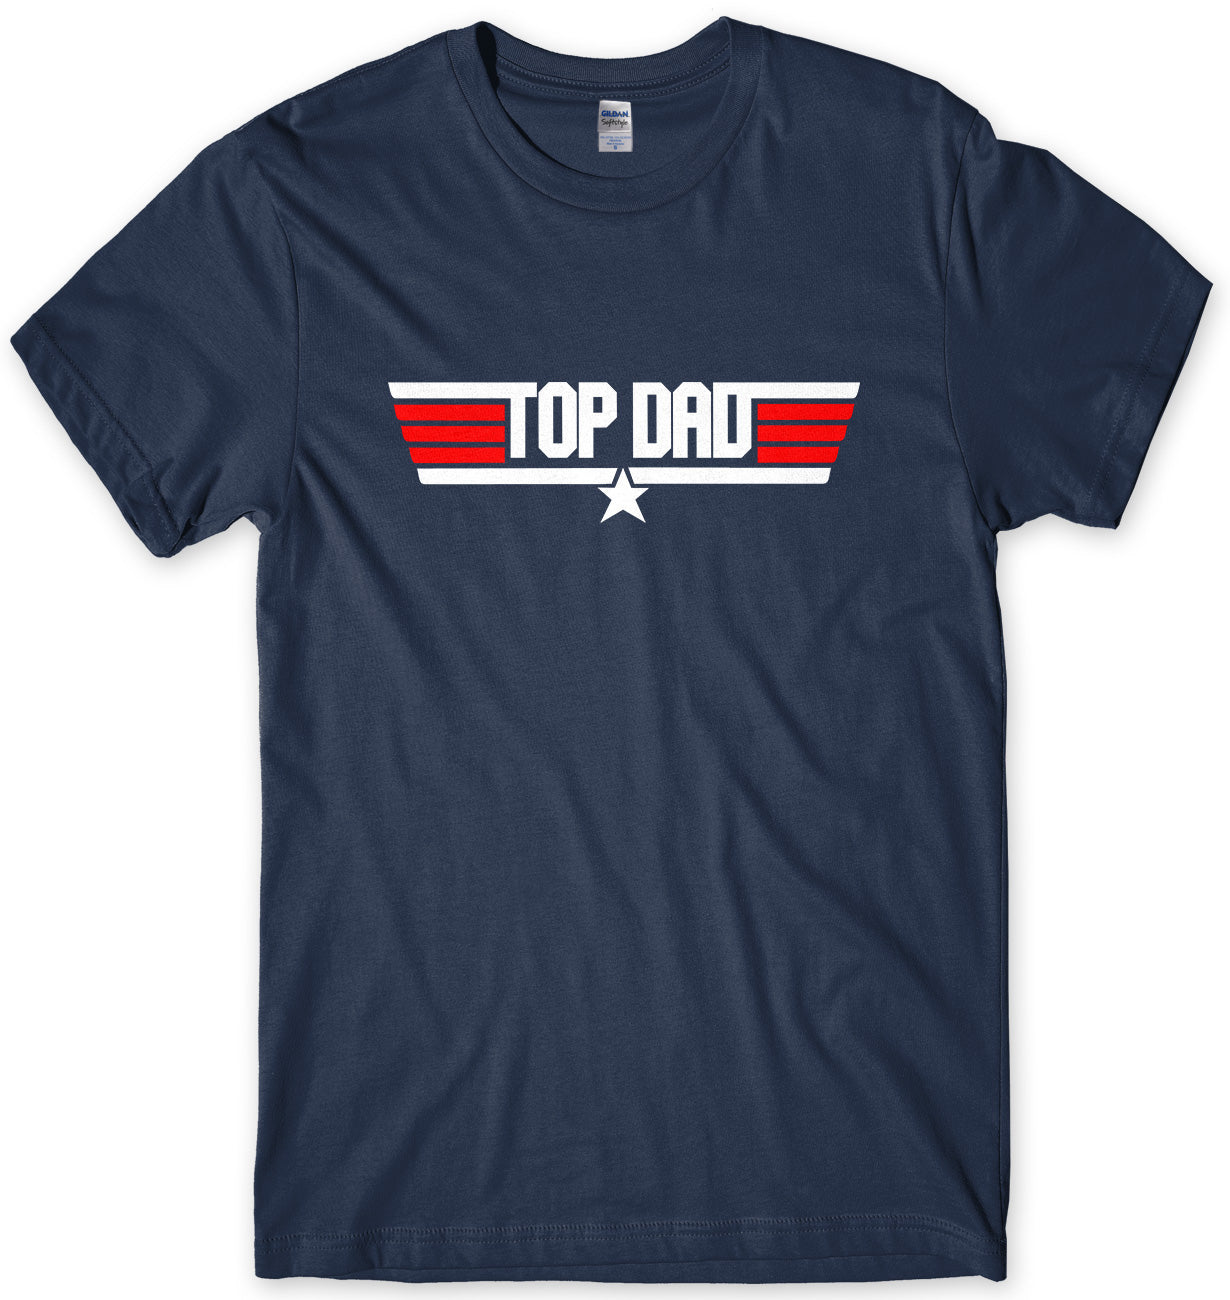 TOP DAD - TOP GUN INSPIRED MENS UNISEX FATHER'S DAY T-SHIRT